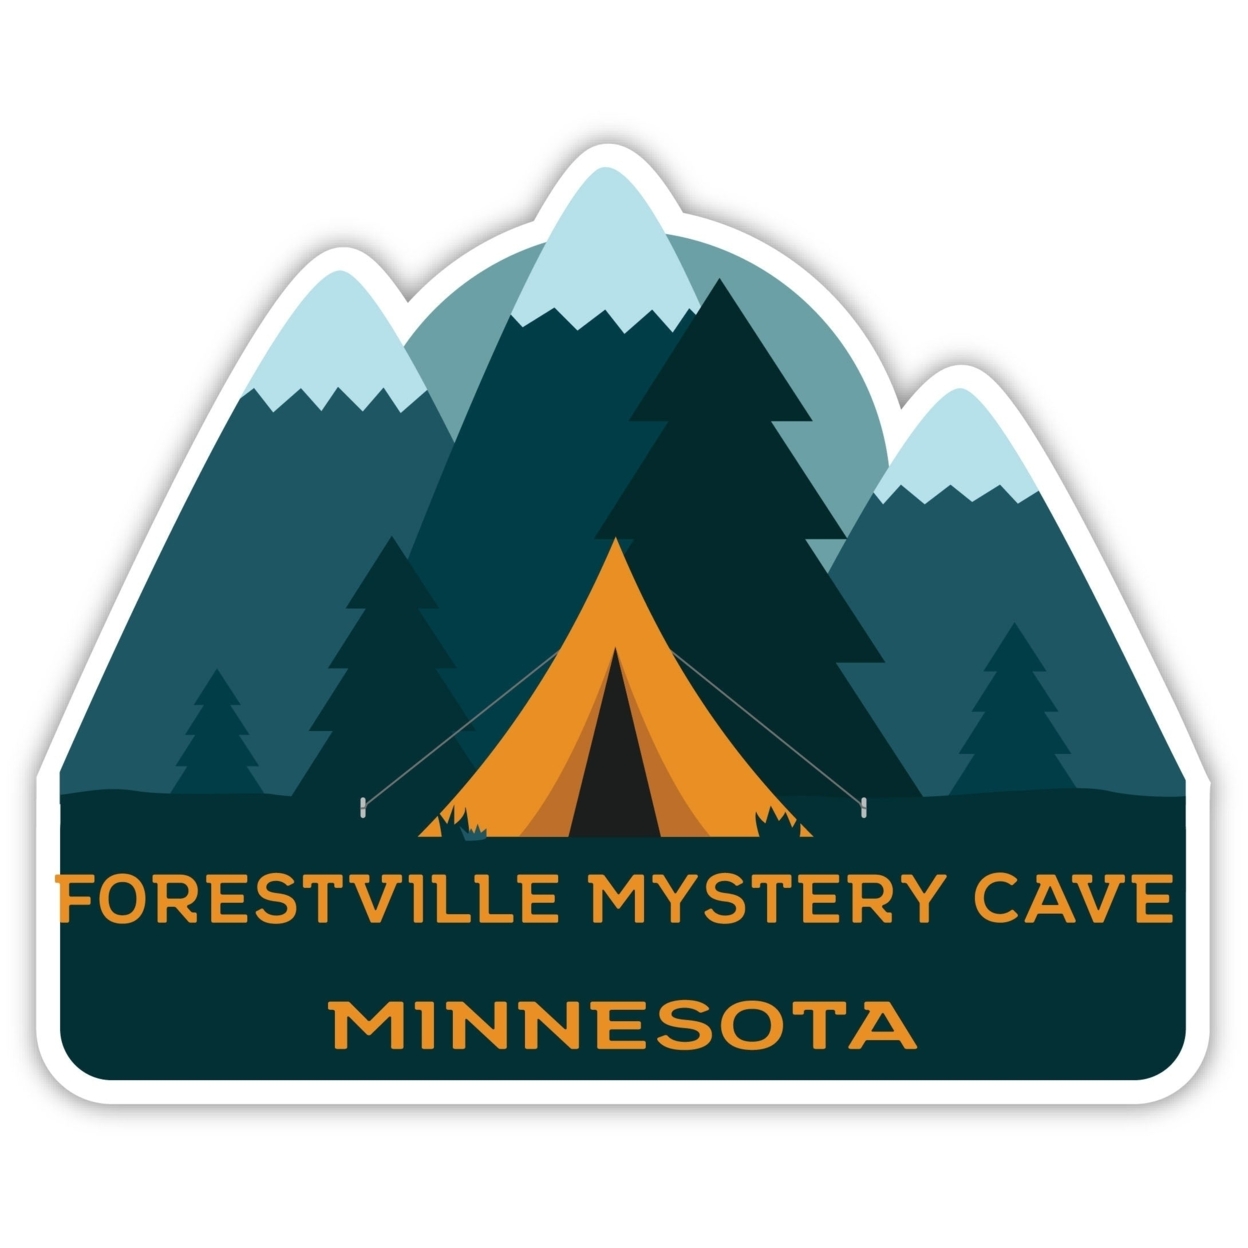 Forestville Mystery Cave Minnesota Souvenir Decorative Stickers (Choose Theme And Size) - Single Unit, 12-Inch, Tent